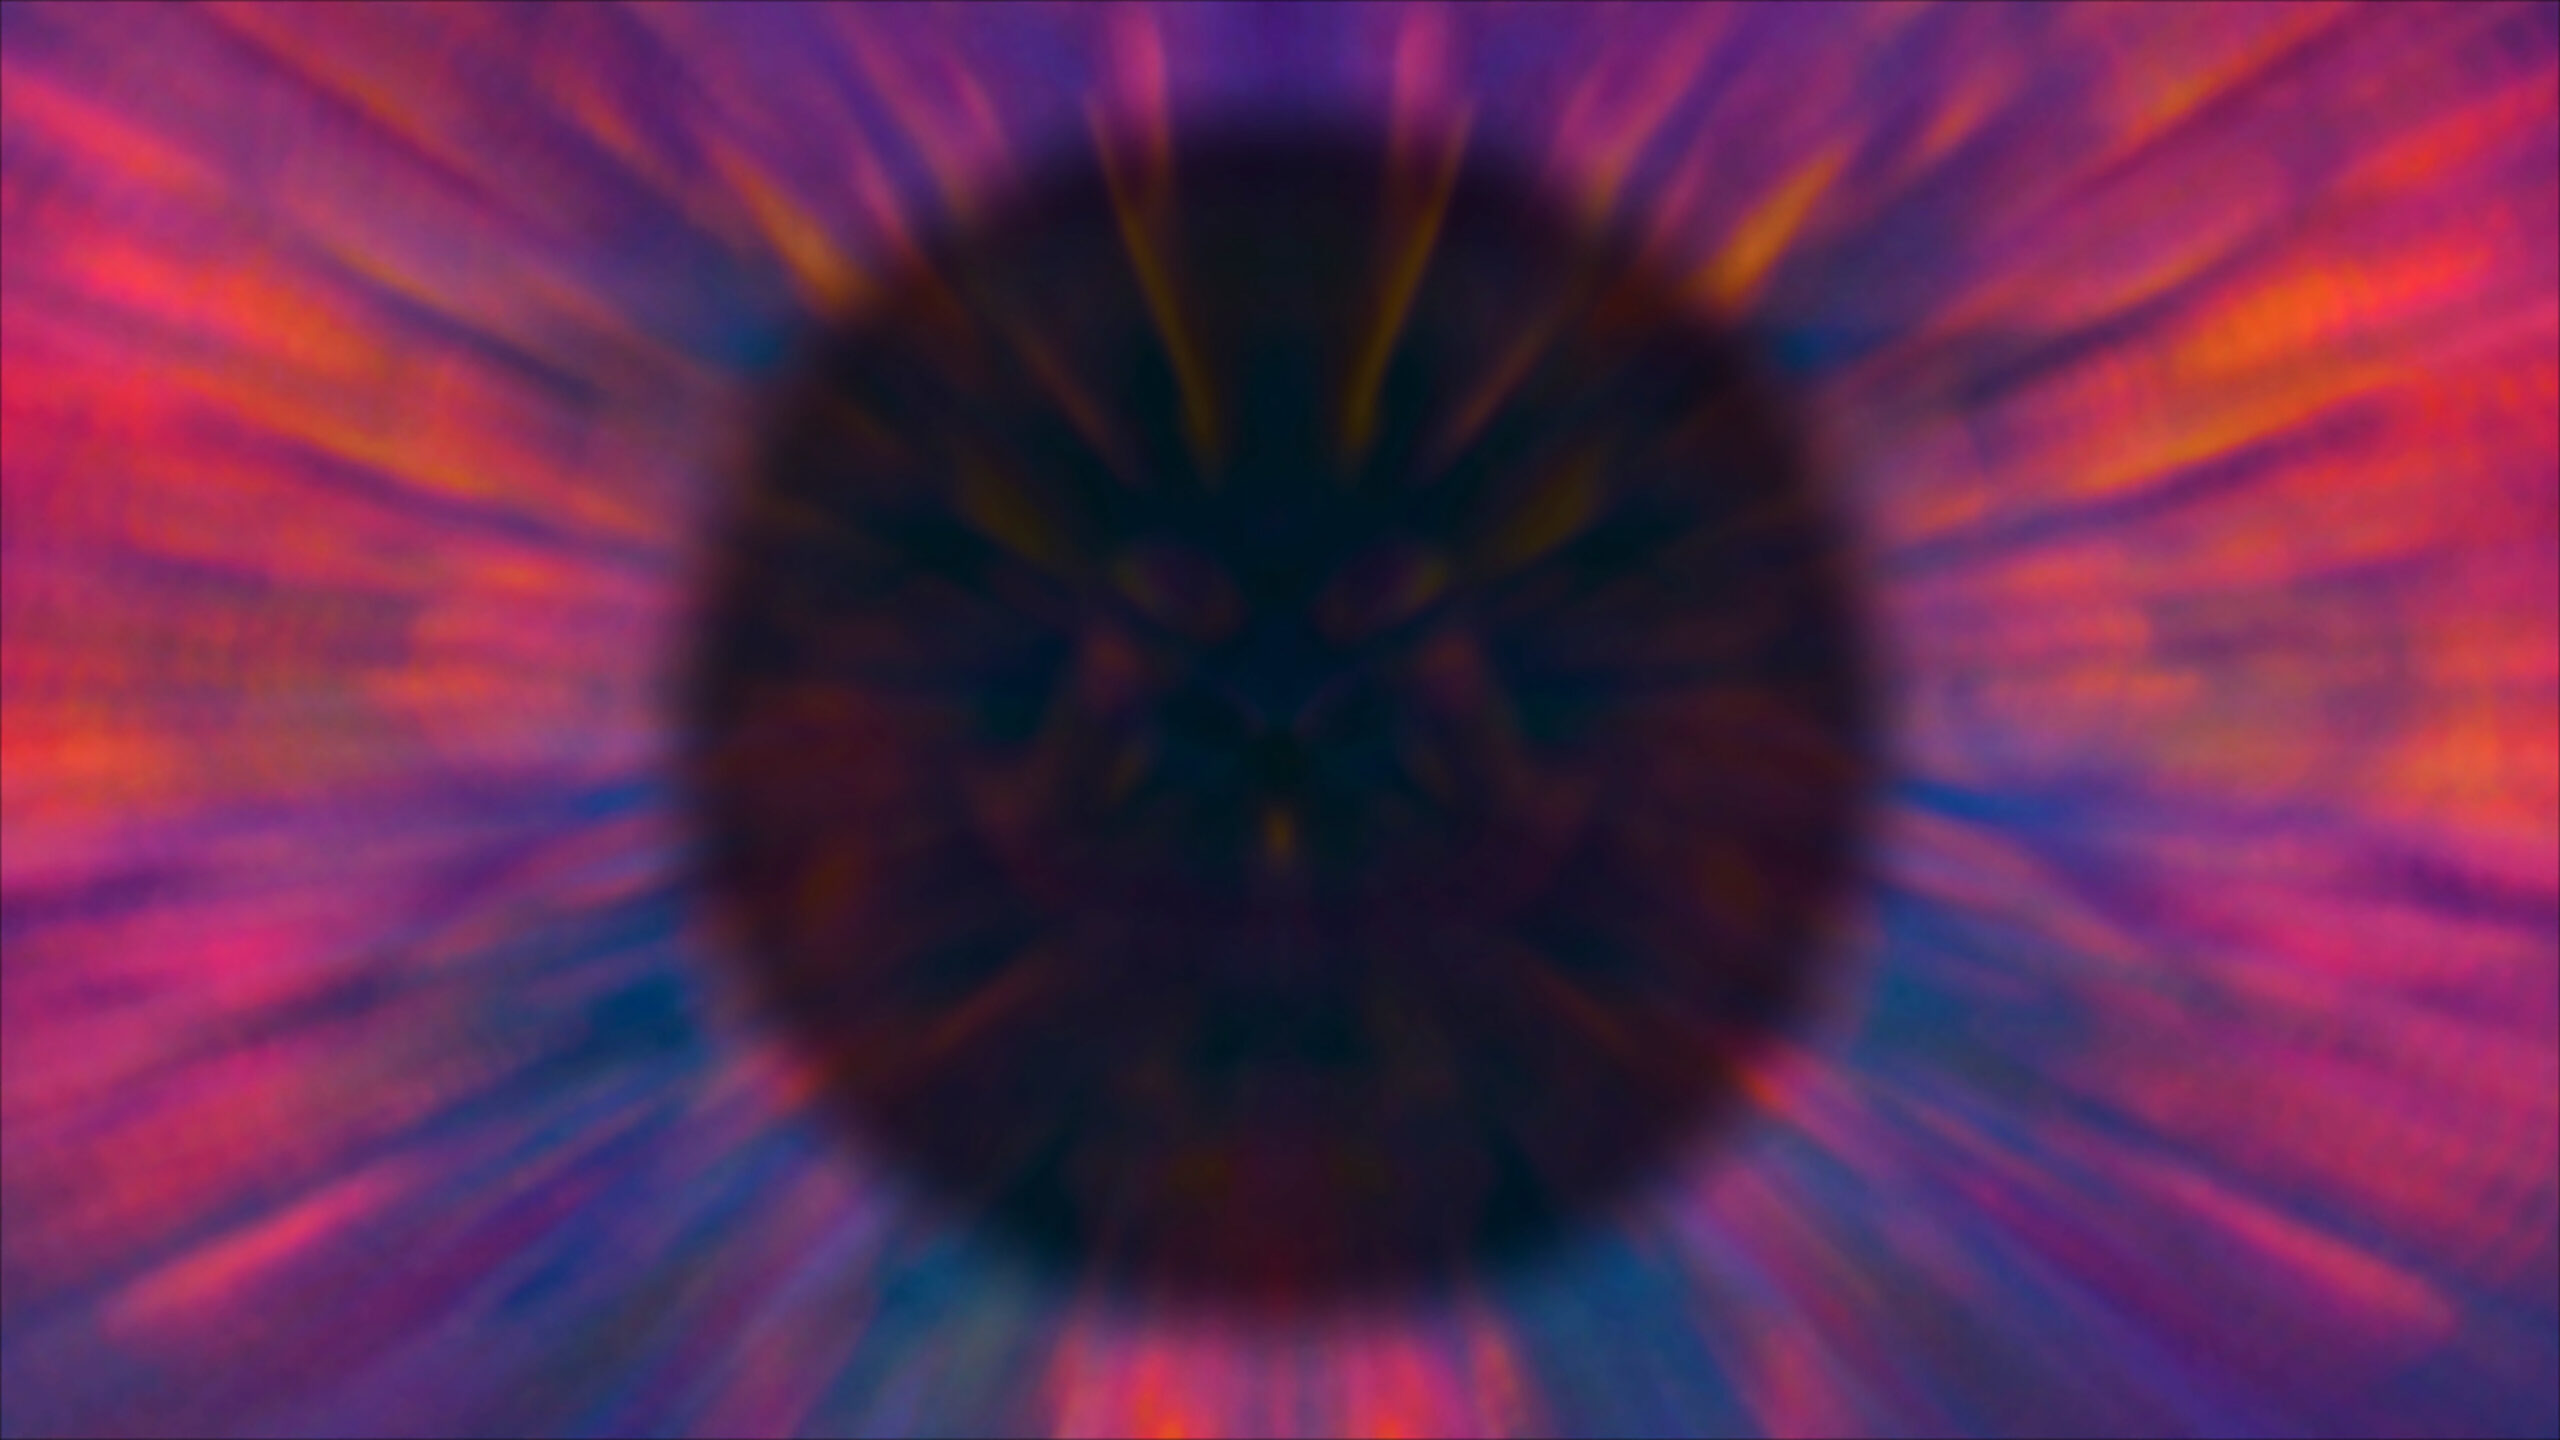 A transparent black circle in the middle of pink and blue psychedelic colurs